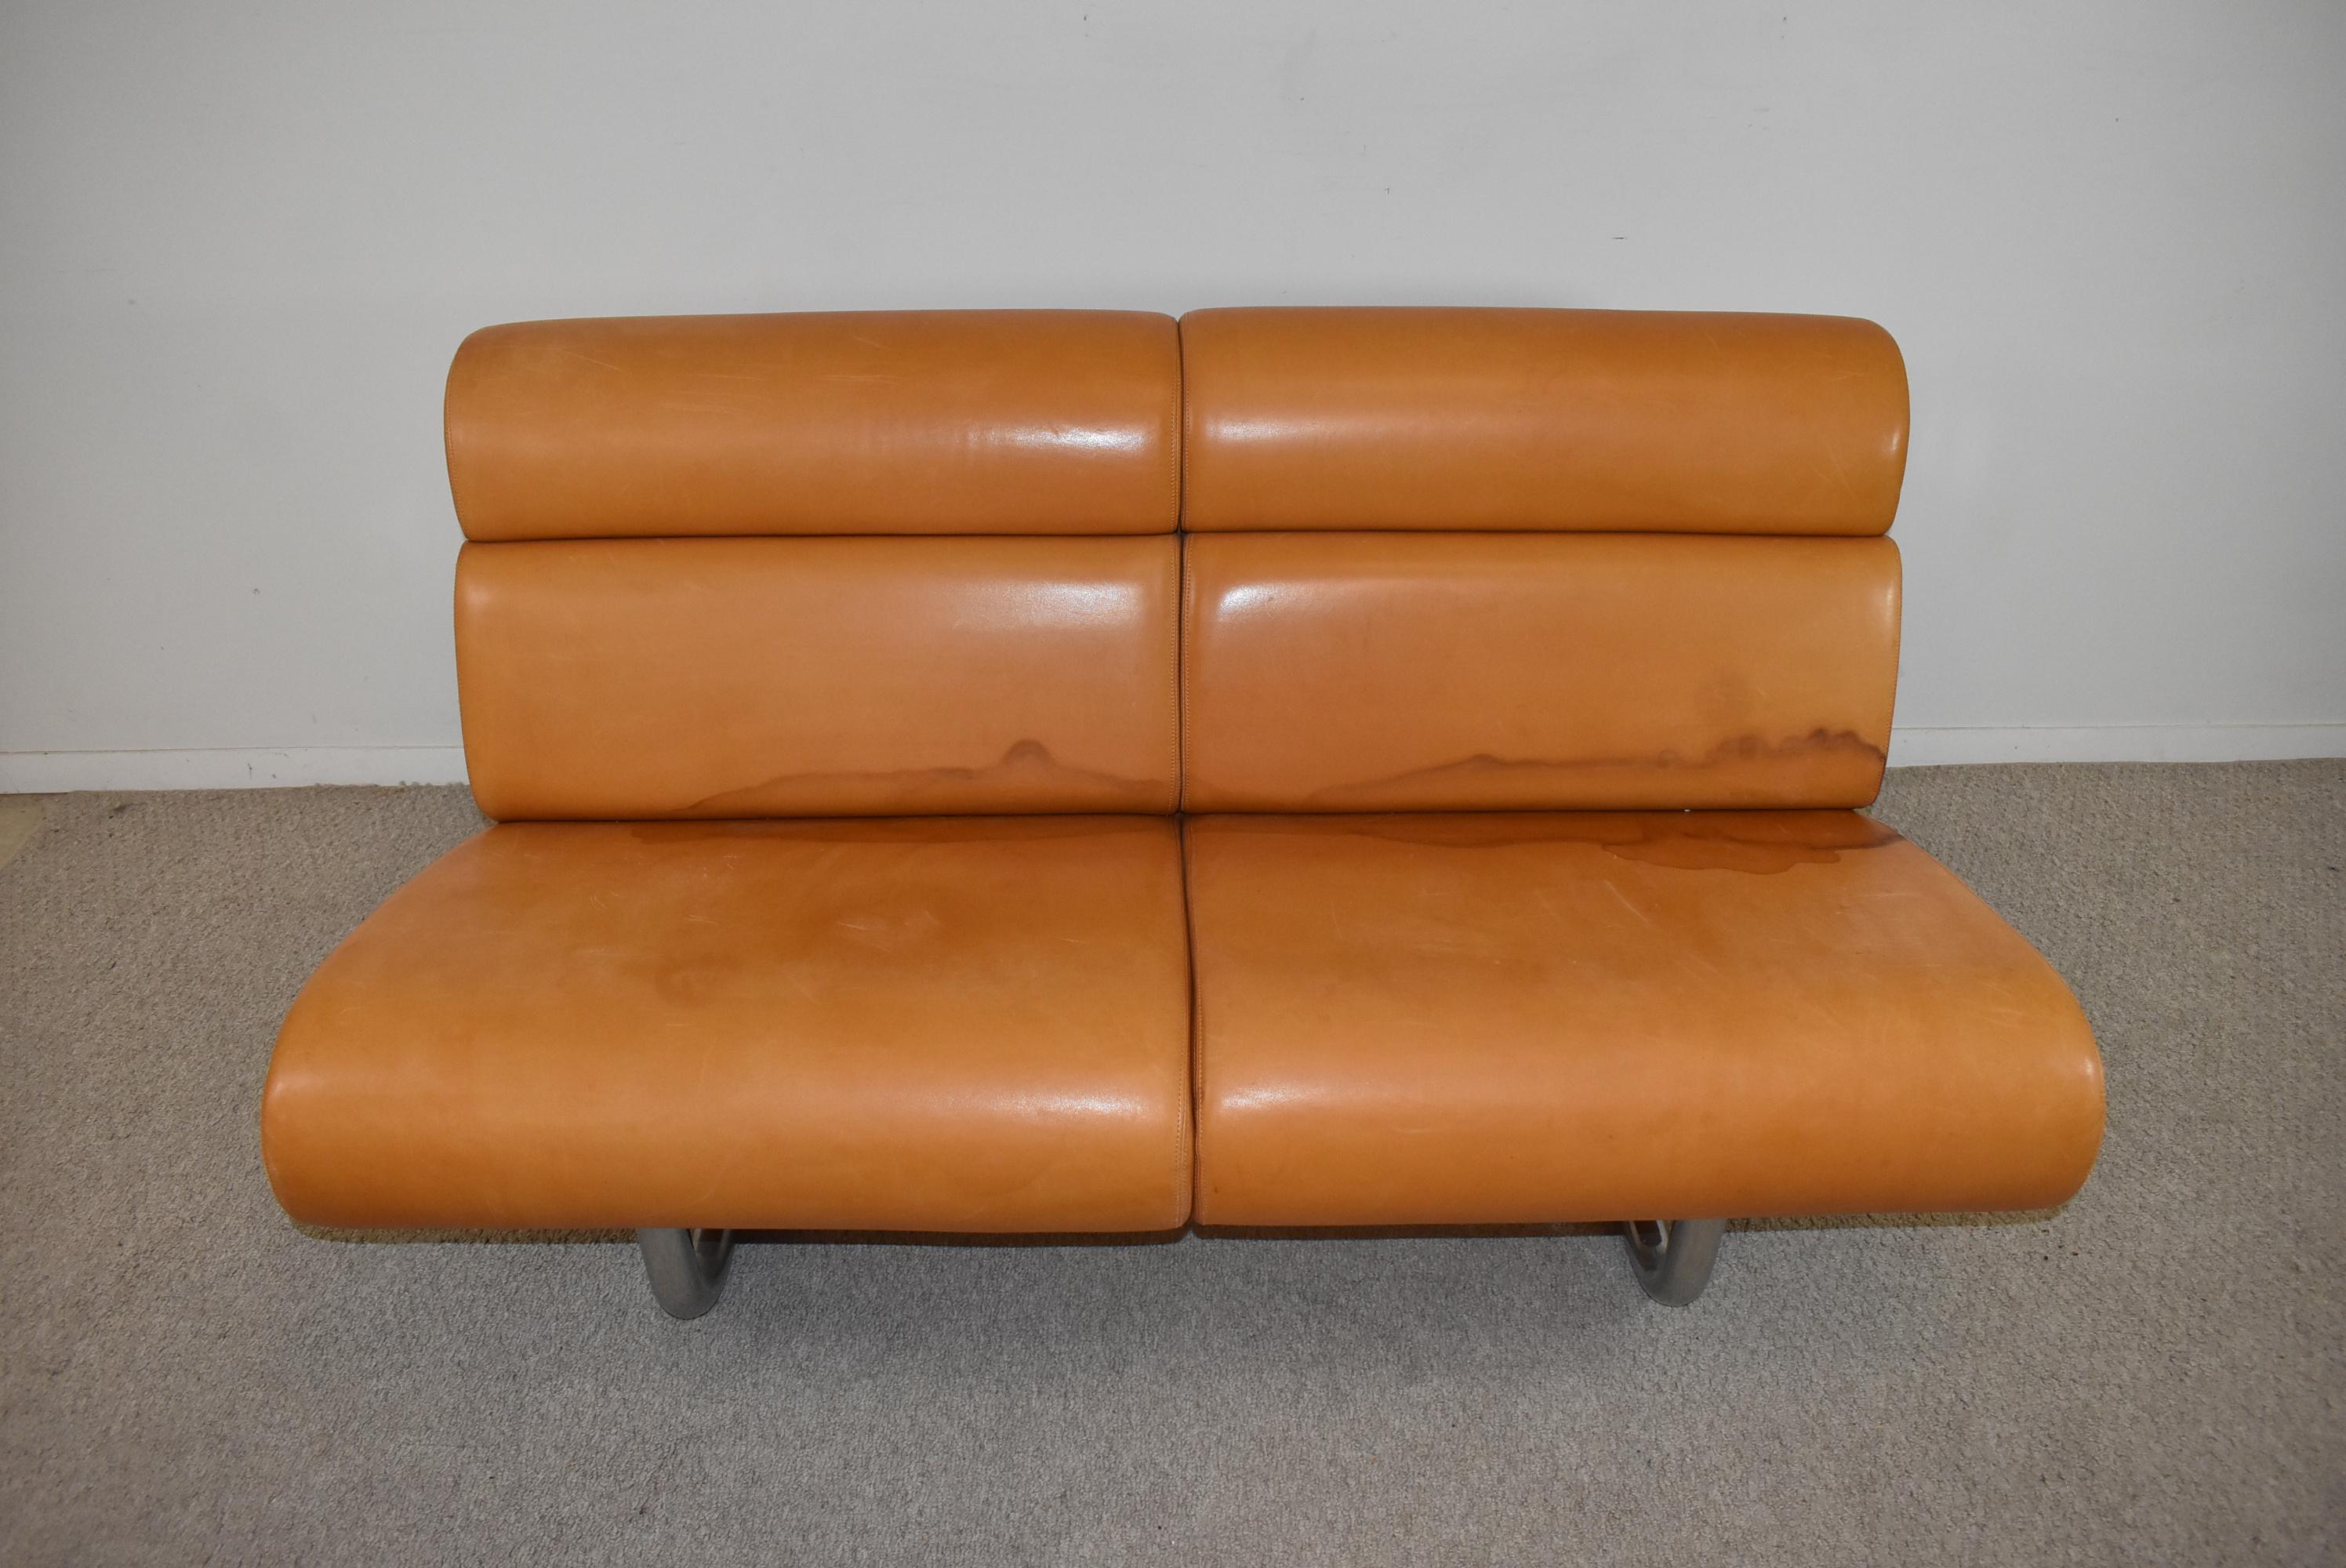 This 1970 sofa designed by Richard Schultz for Knoll features a leather cushioned front and back, and was created with modular sections that hang from a steel tubular frame. 56